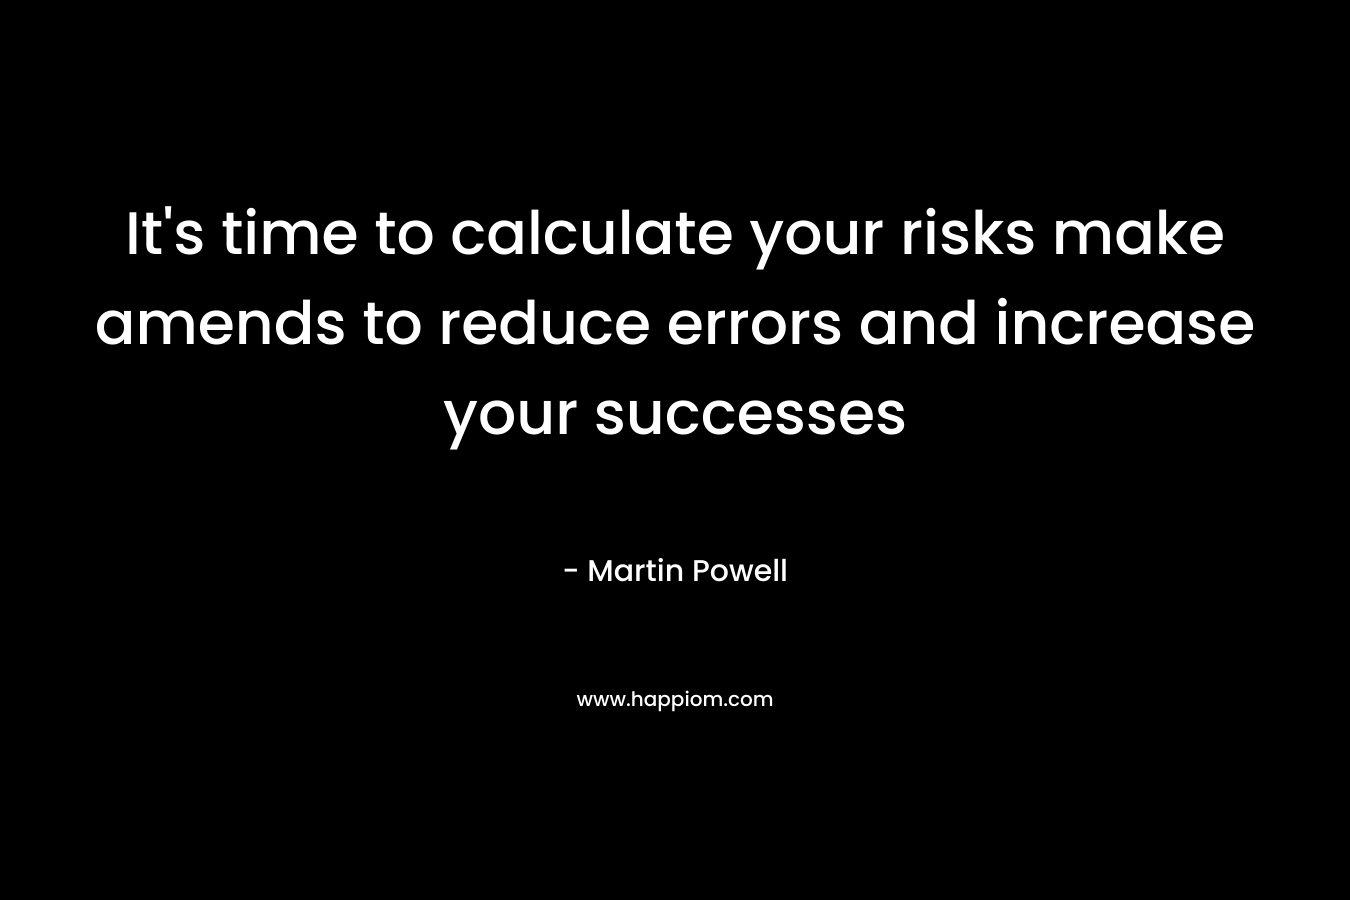 It's time to calculate your risks make amends to reduce errors and increase your successes